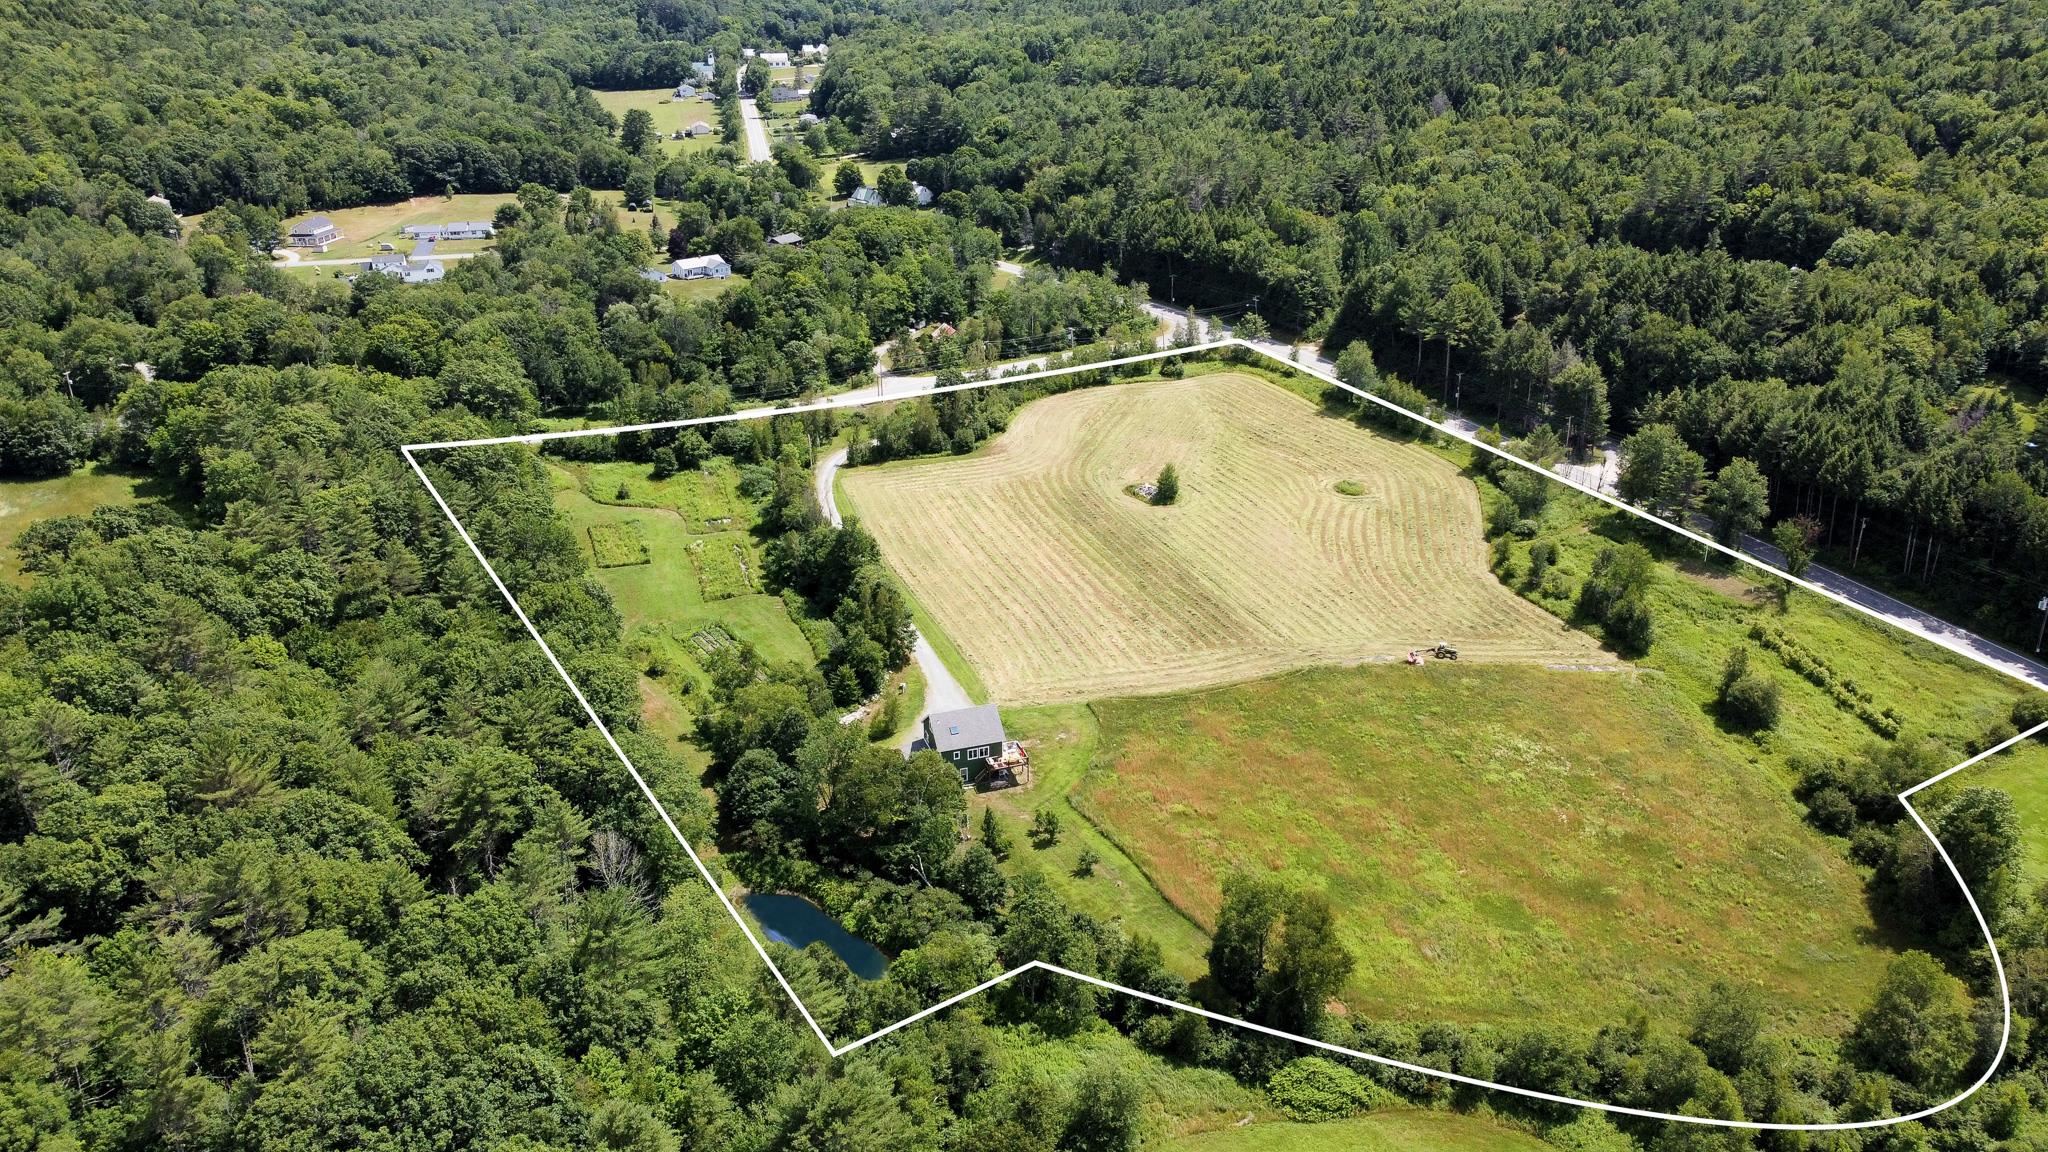 Property from air, looking SE, outlined in white